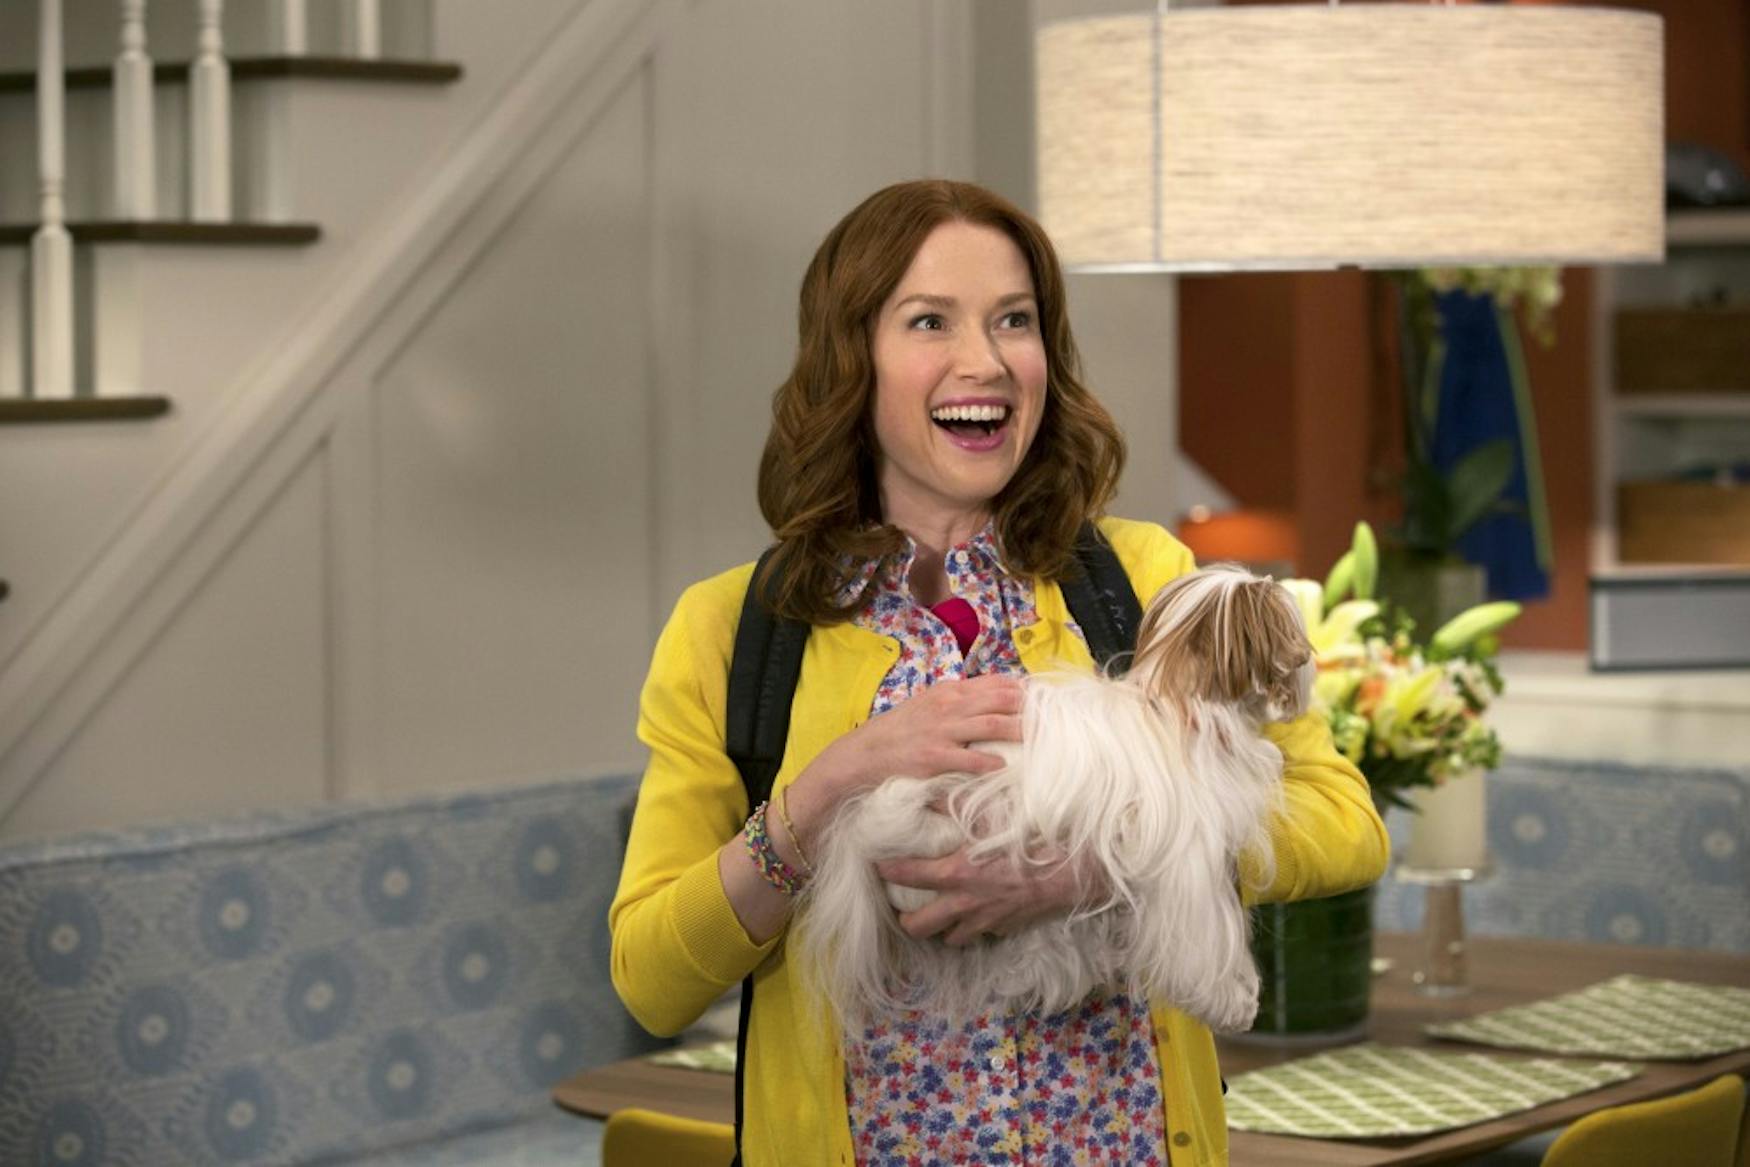 A WHOLE NEW WORLD: Kimmy Schmidt arrives in New York City after living underground in a doomsday shelter for her whole life.